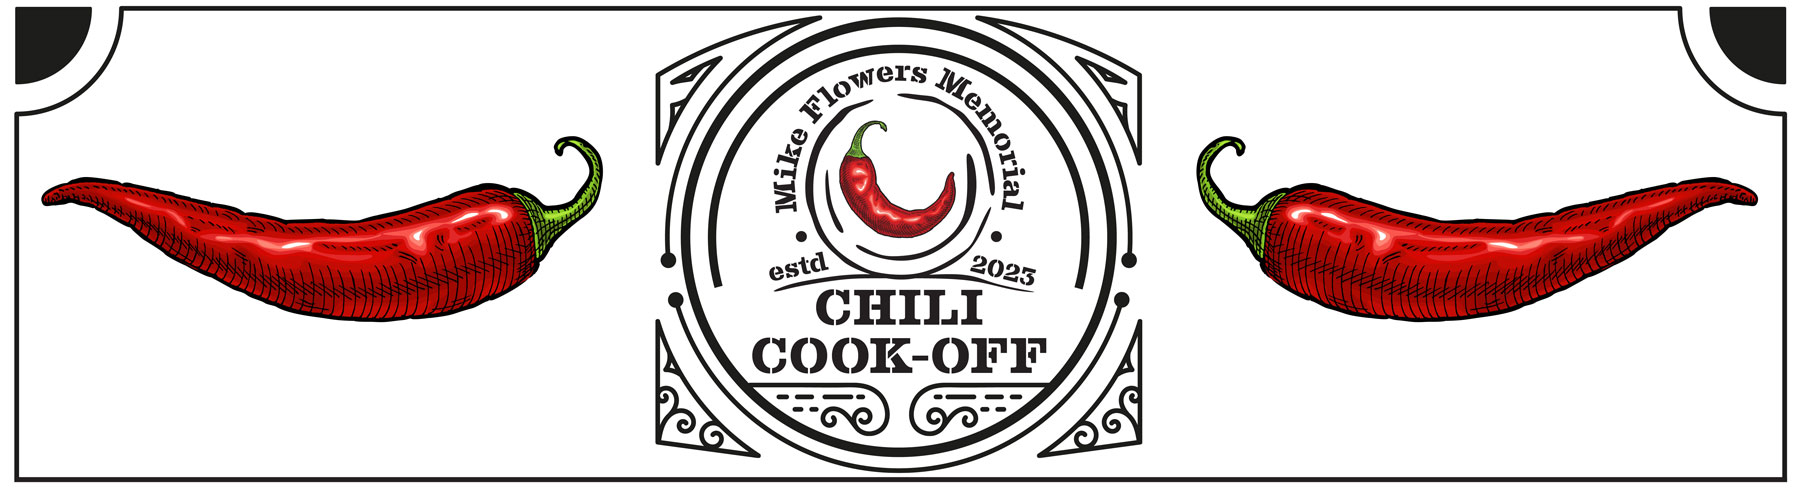 Mike Flowers Chili Cook-off in the Cayman Islands